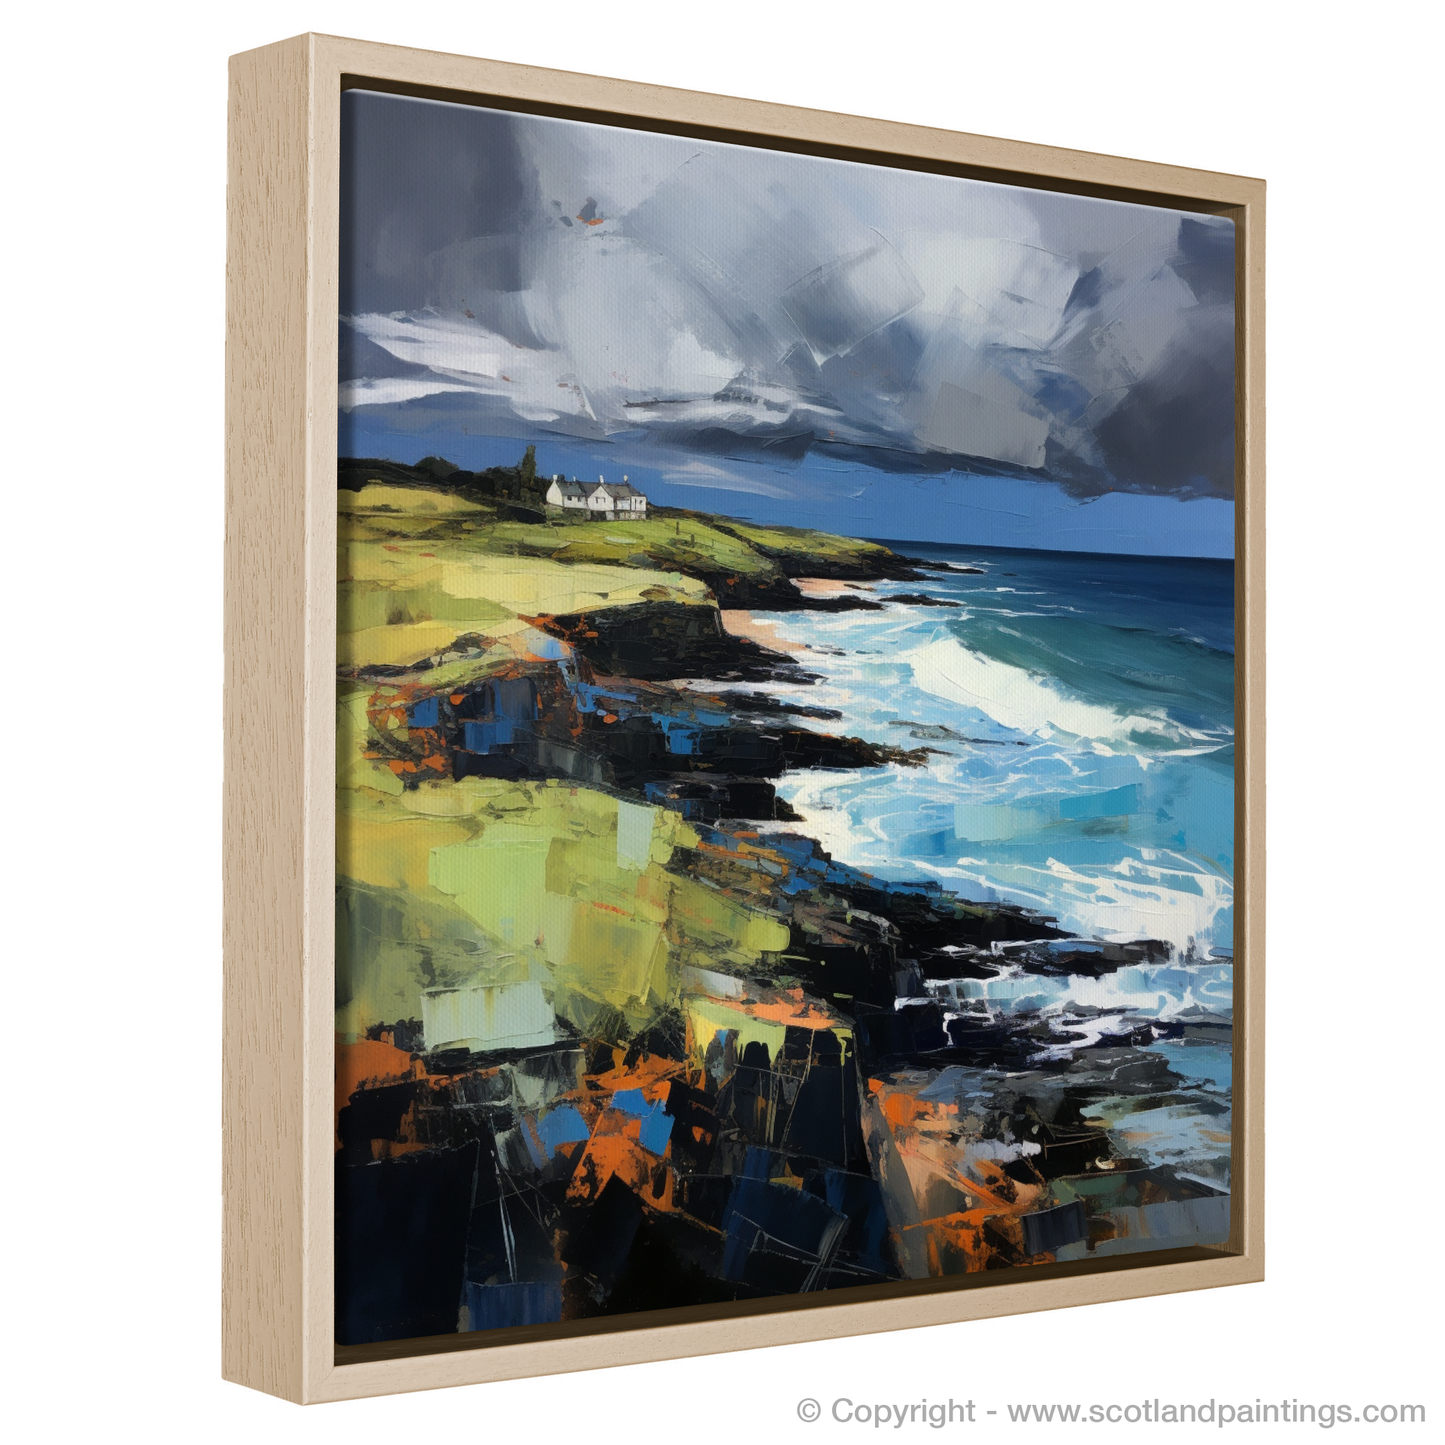 Painting and Art Print of Coldingham Bay with a stormy sky entitled "Storm's Embrace over Coldingham Bay".